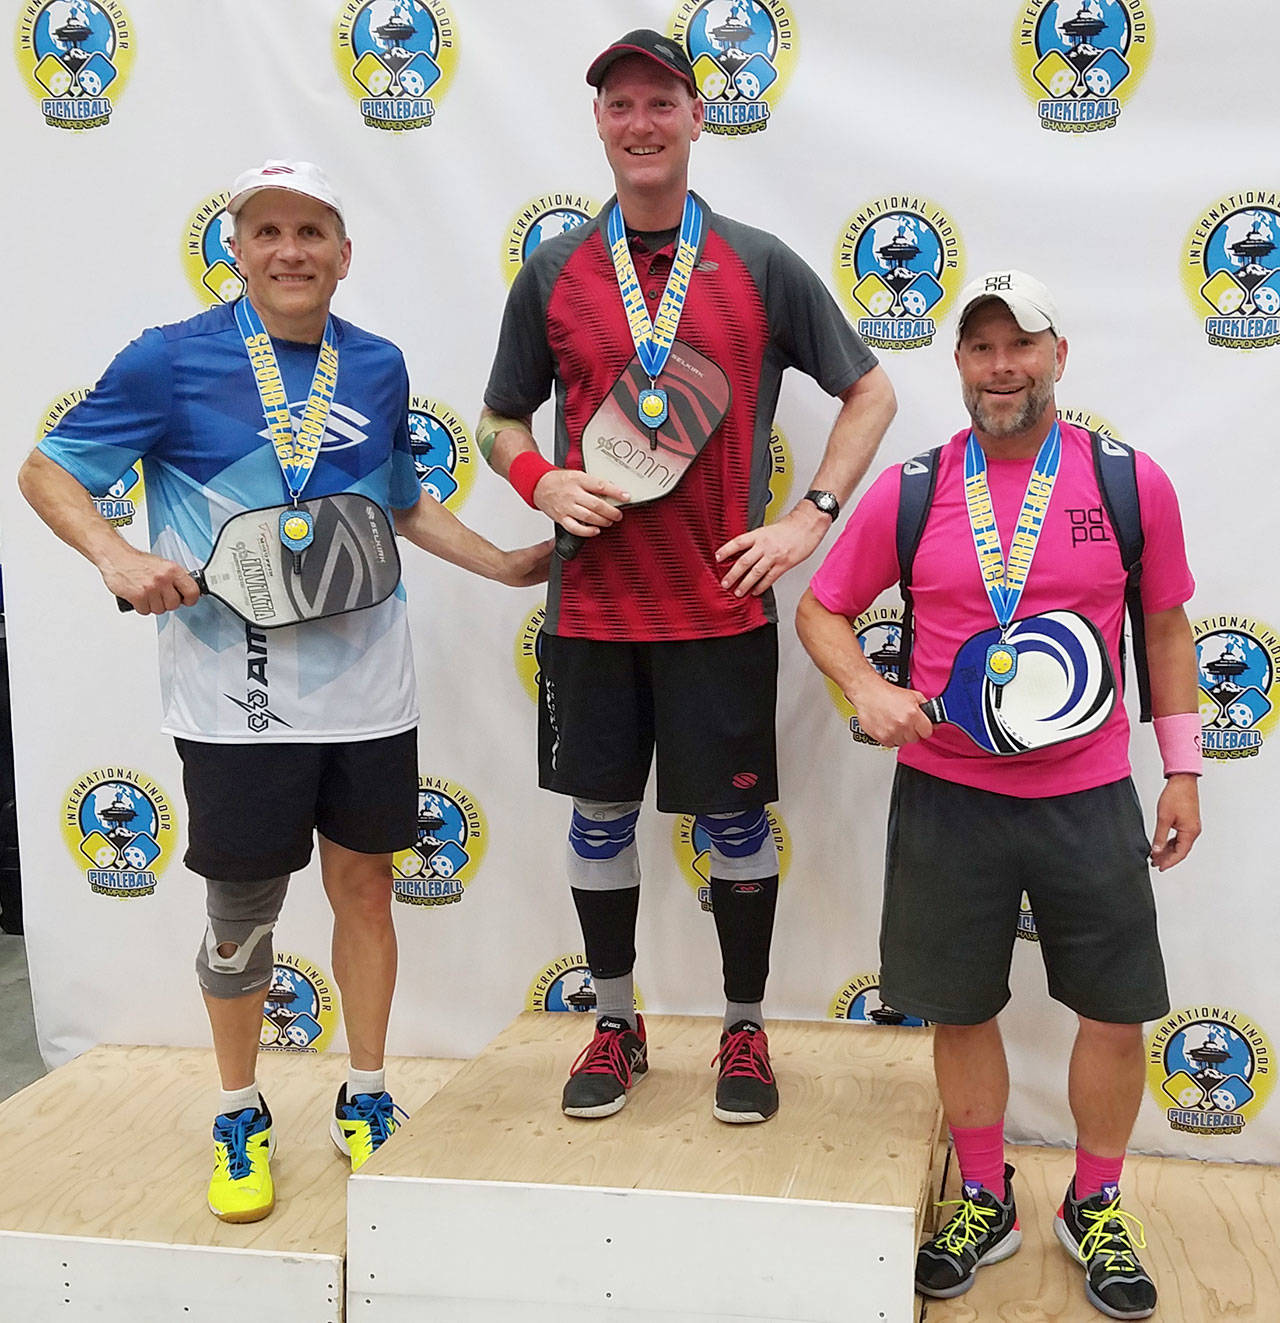 Hastings takes gold, locals earn silvers at indoor pickleball tourney